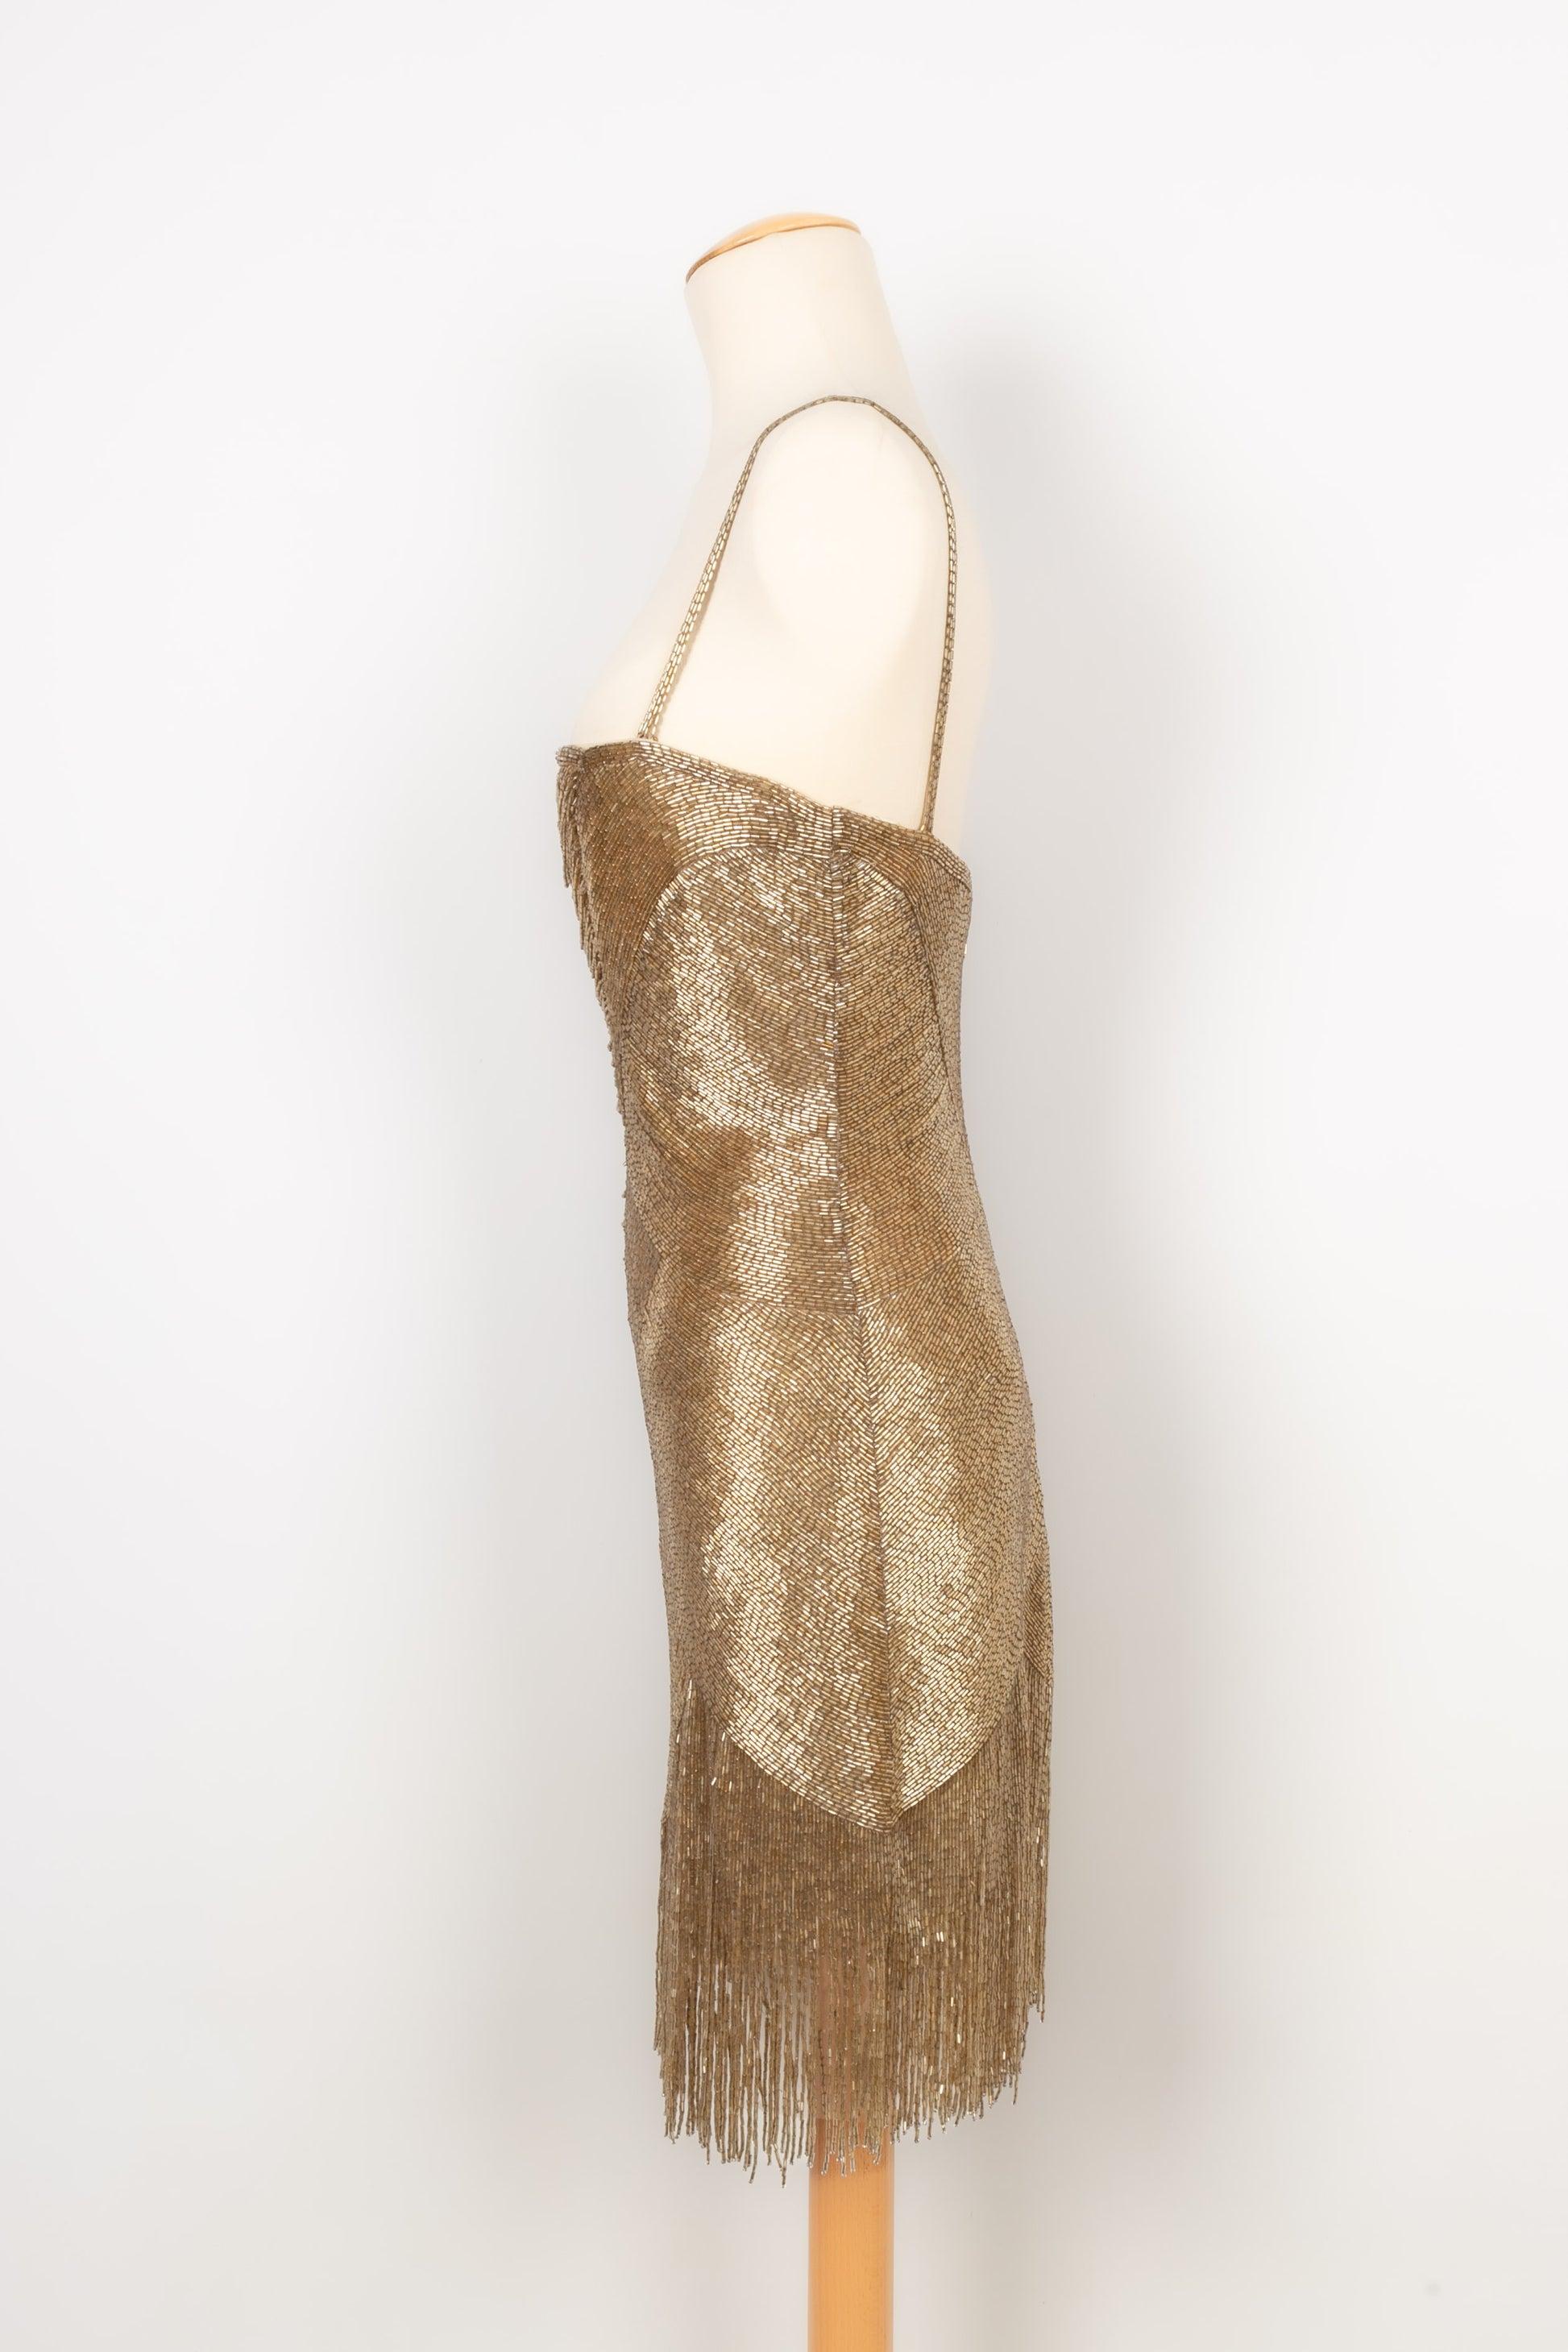 Cavalli - Dress entirely sewn with costume golden pearls, bottom of the dress fringed with pearls. No size indicated, it fits a 34FR/36FR.

Additional information:
Condition: Very good condition
Dimensions: Chest: 49 cm - Waist: 36 cm - Hips: 42 cm